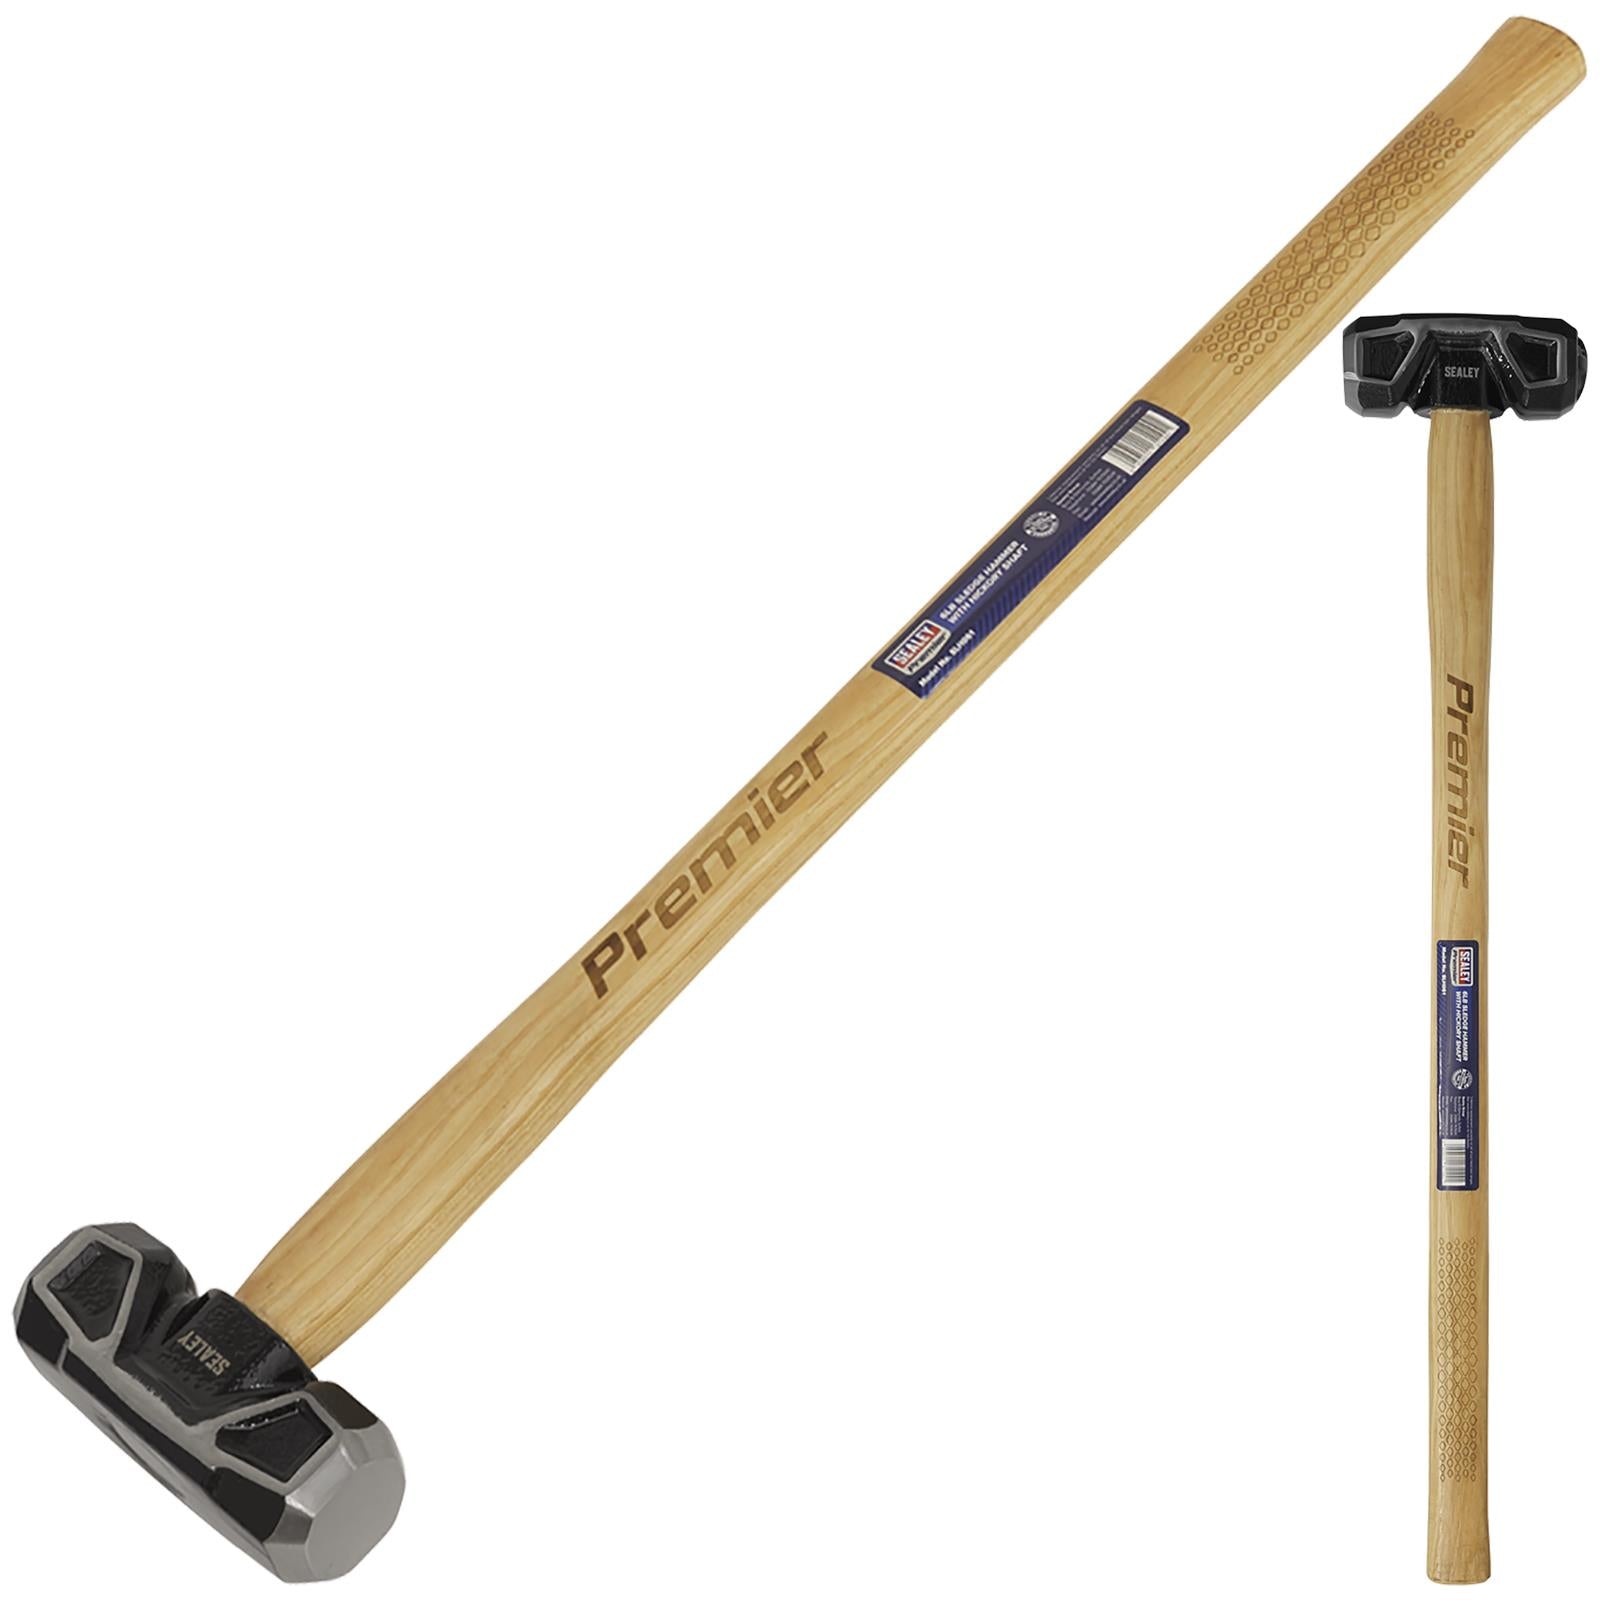 Sealey Sledge Hammer 6lb with Hickory Shaft Premier